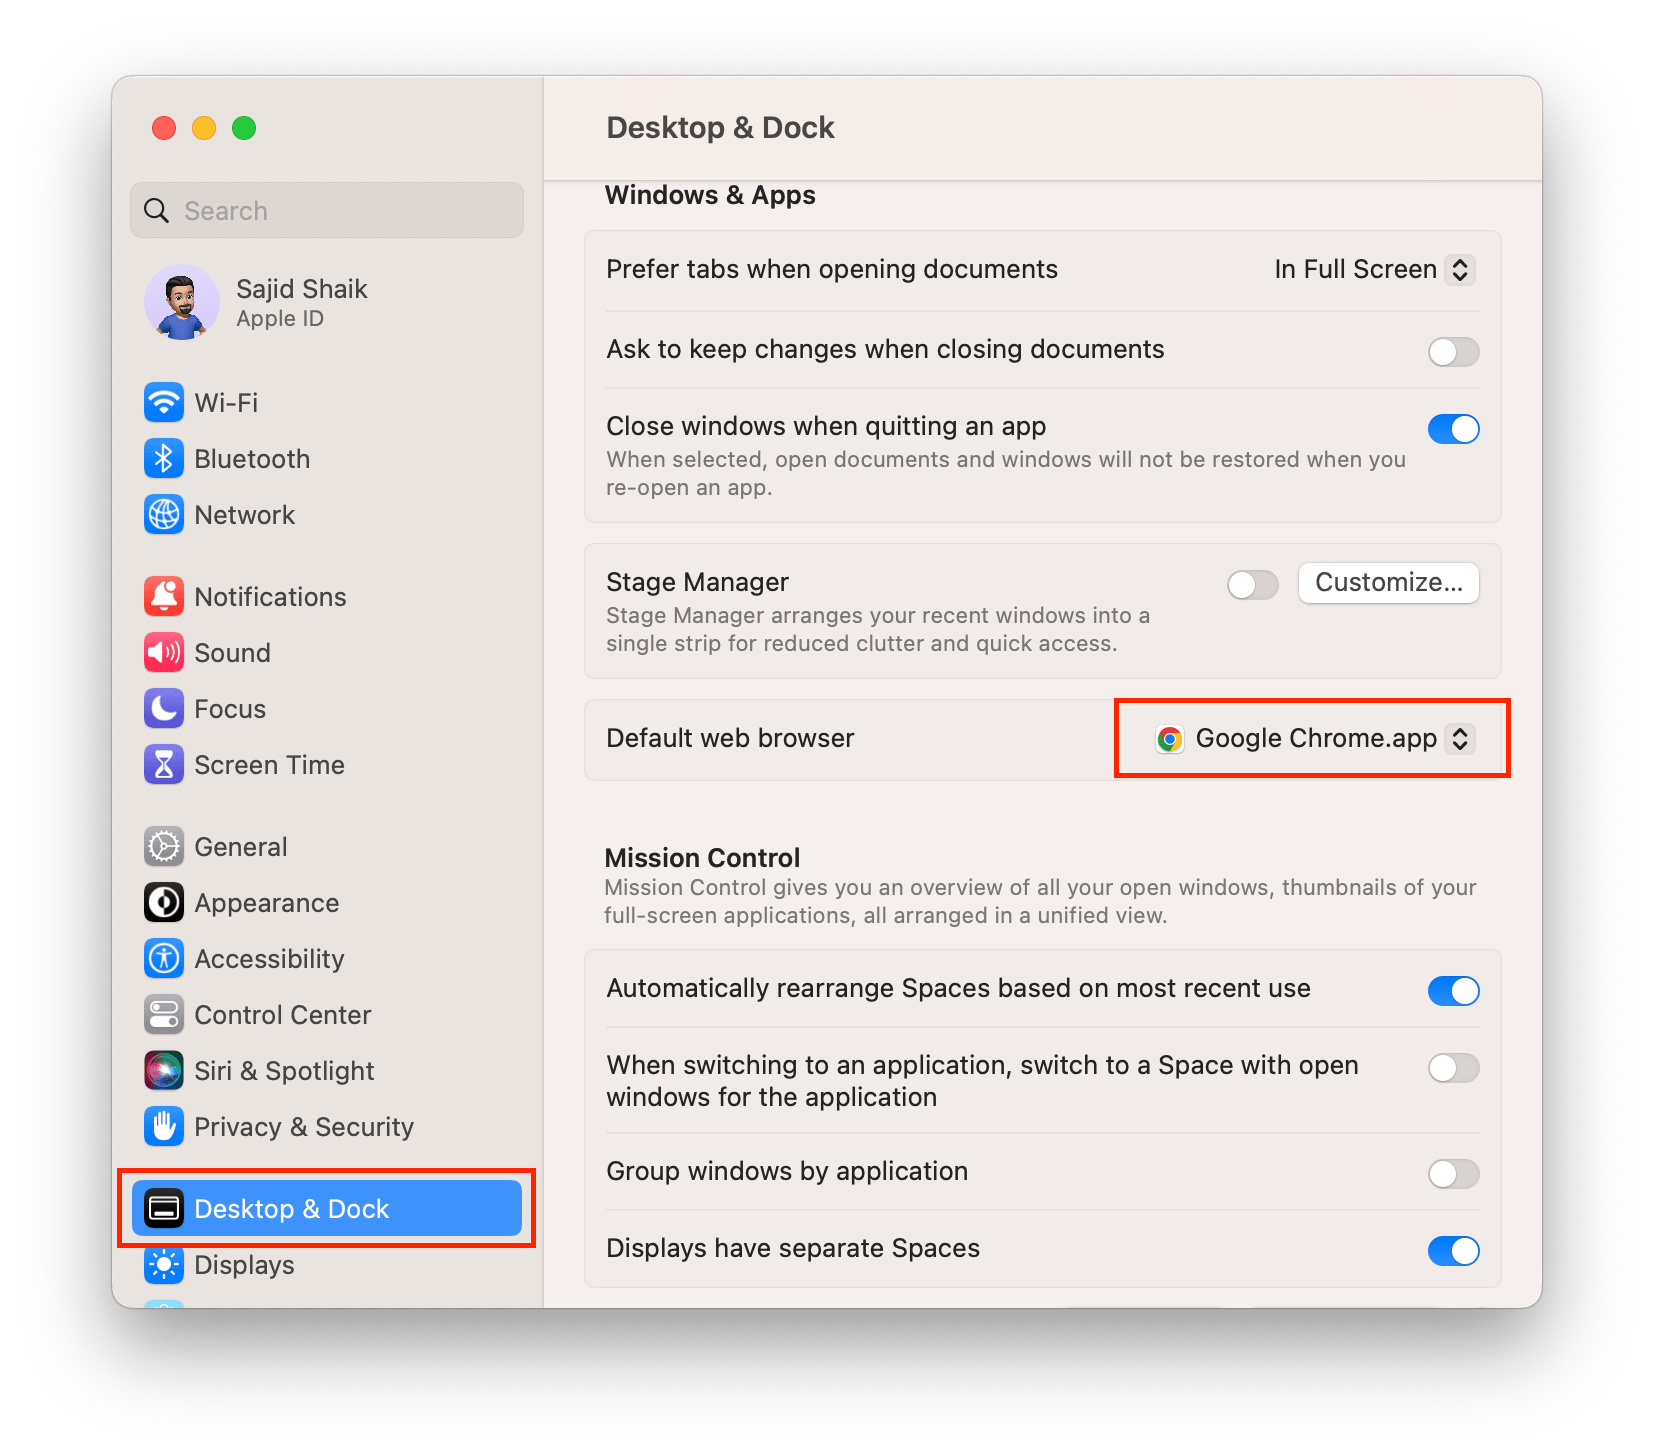 Change default web browser from System Settings, Display & Dock, and then select your default browser for your Mac.